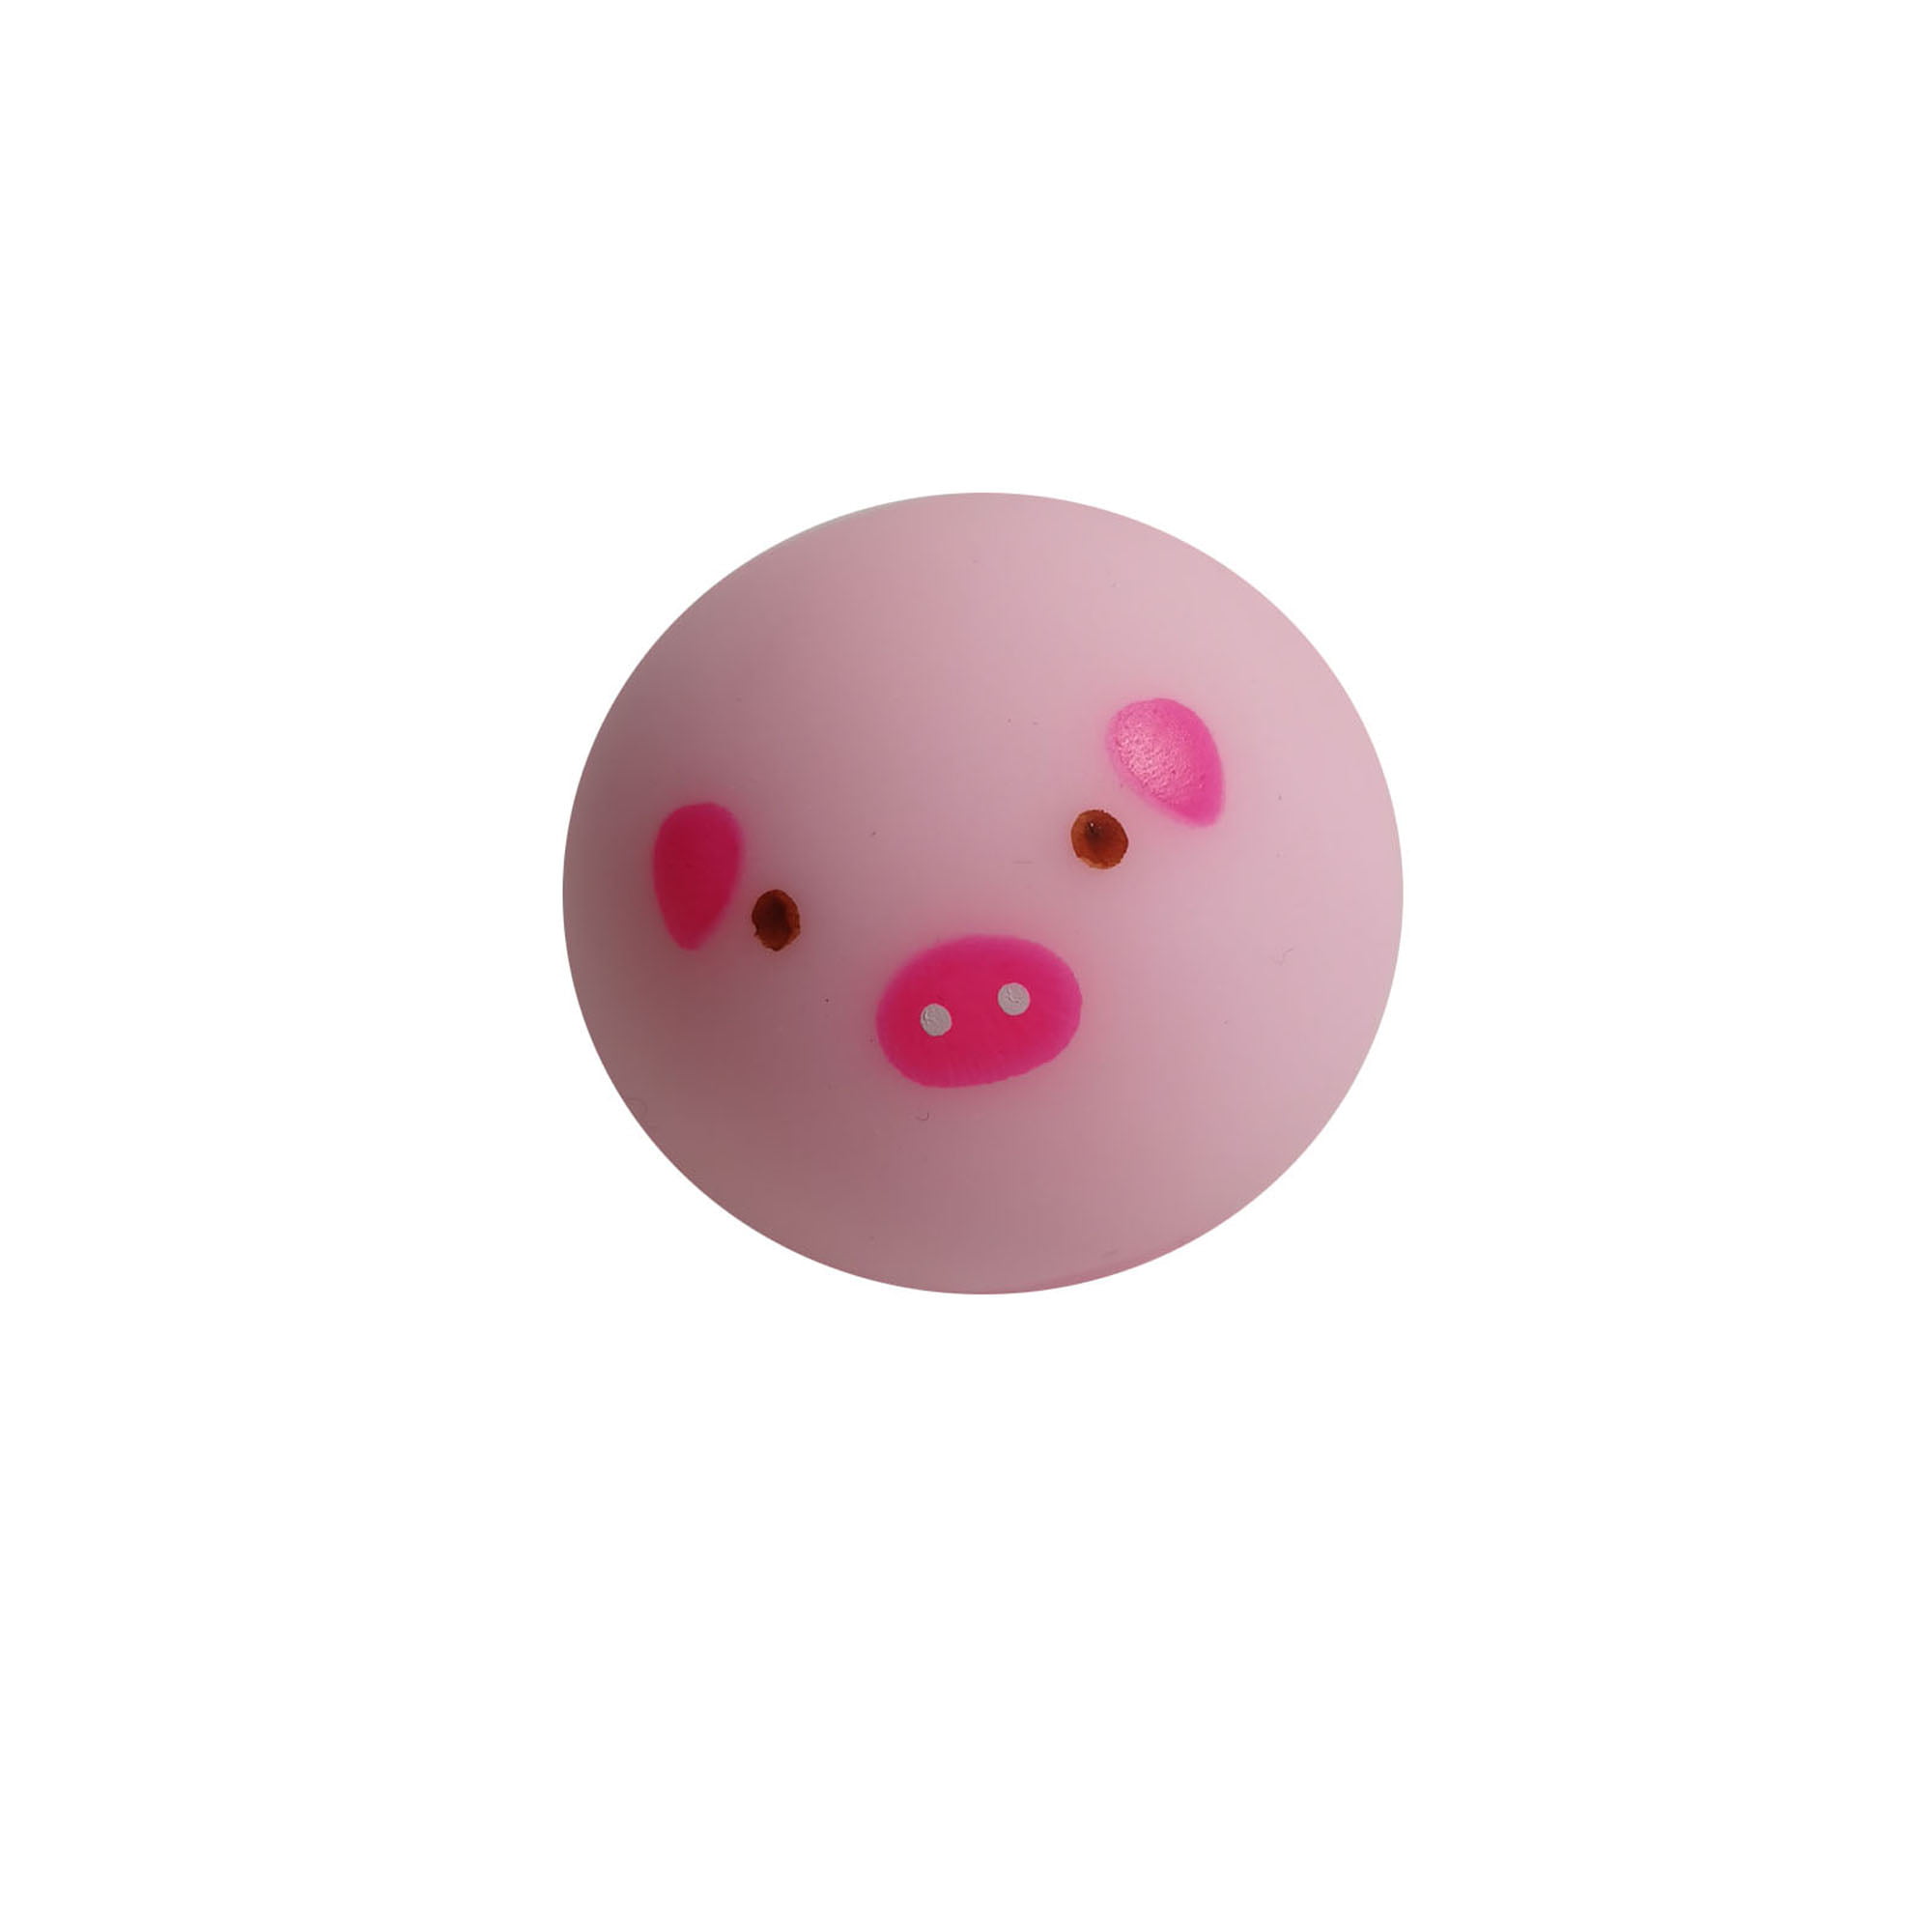 Set of 4 Soft Slow Rise PLUSH Squishy Stress Relief Balls w/ Clip Pig Cow Chick 